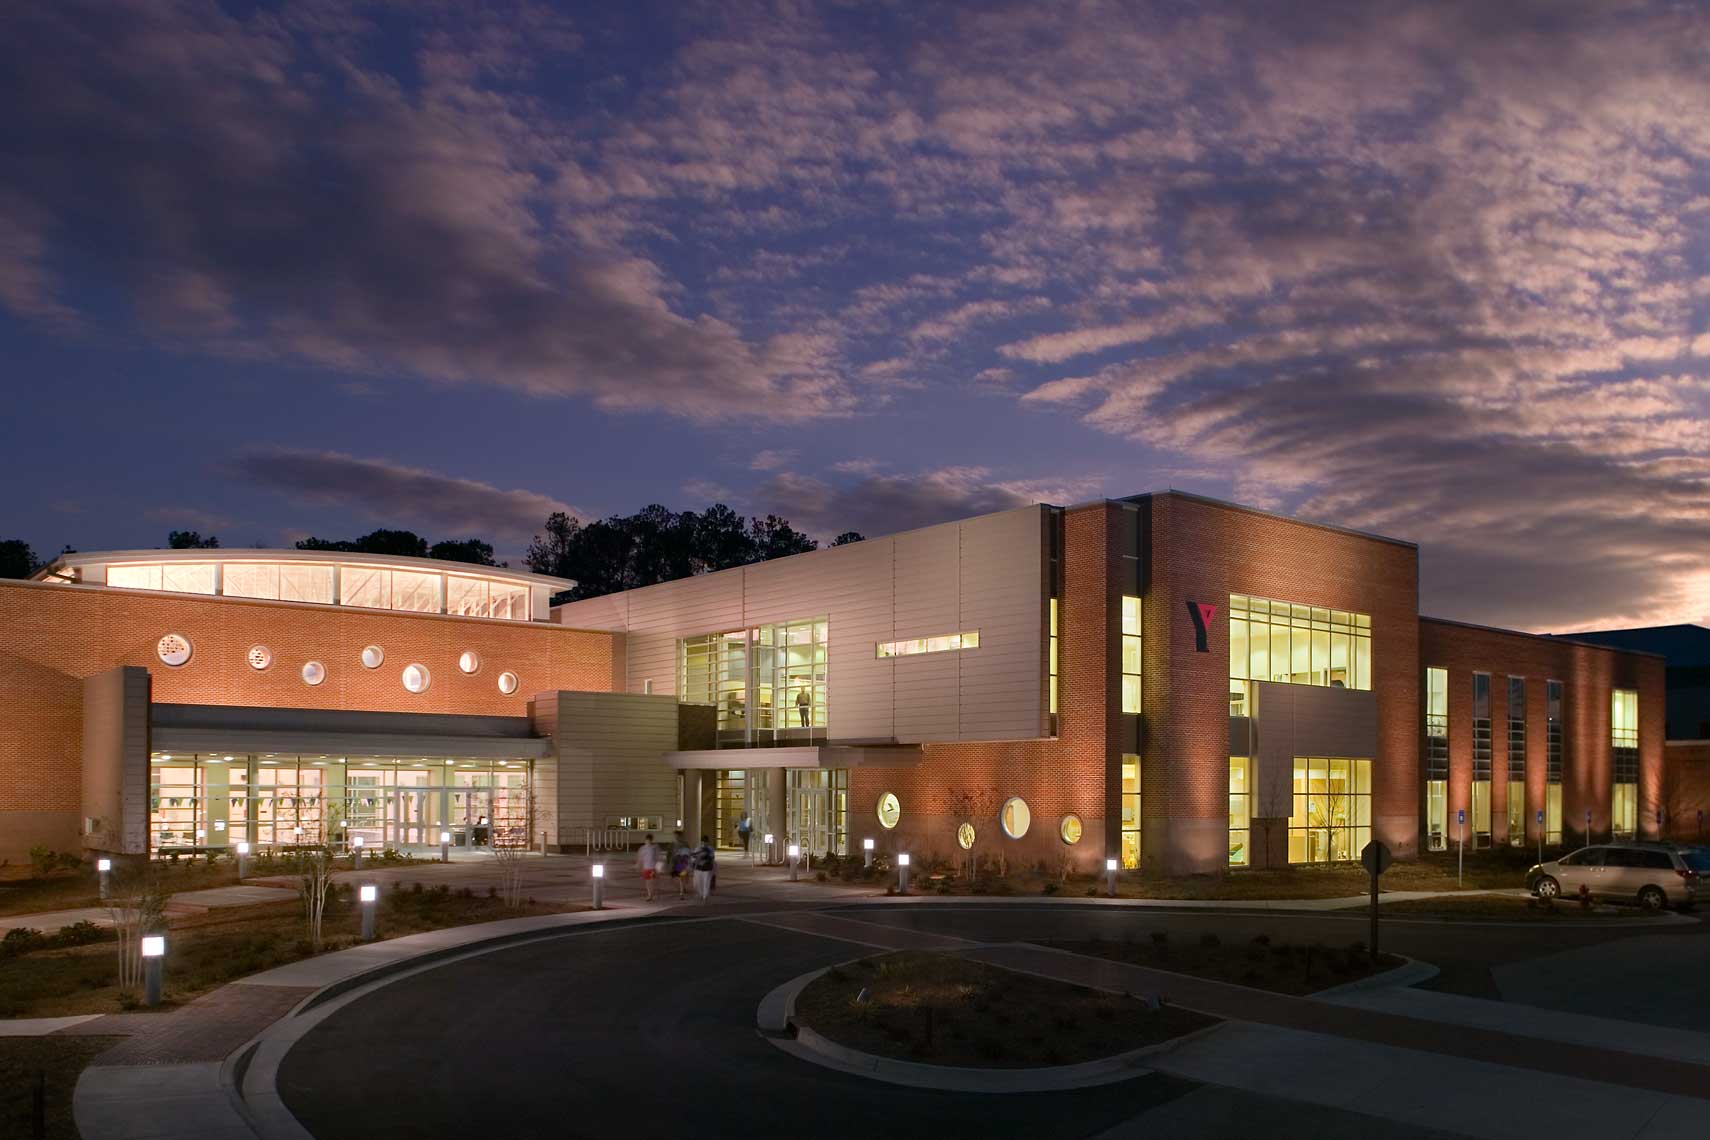 A twilight exterior view of the Summit Family YMCA